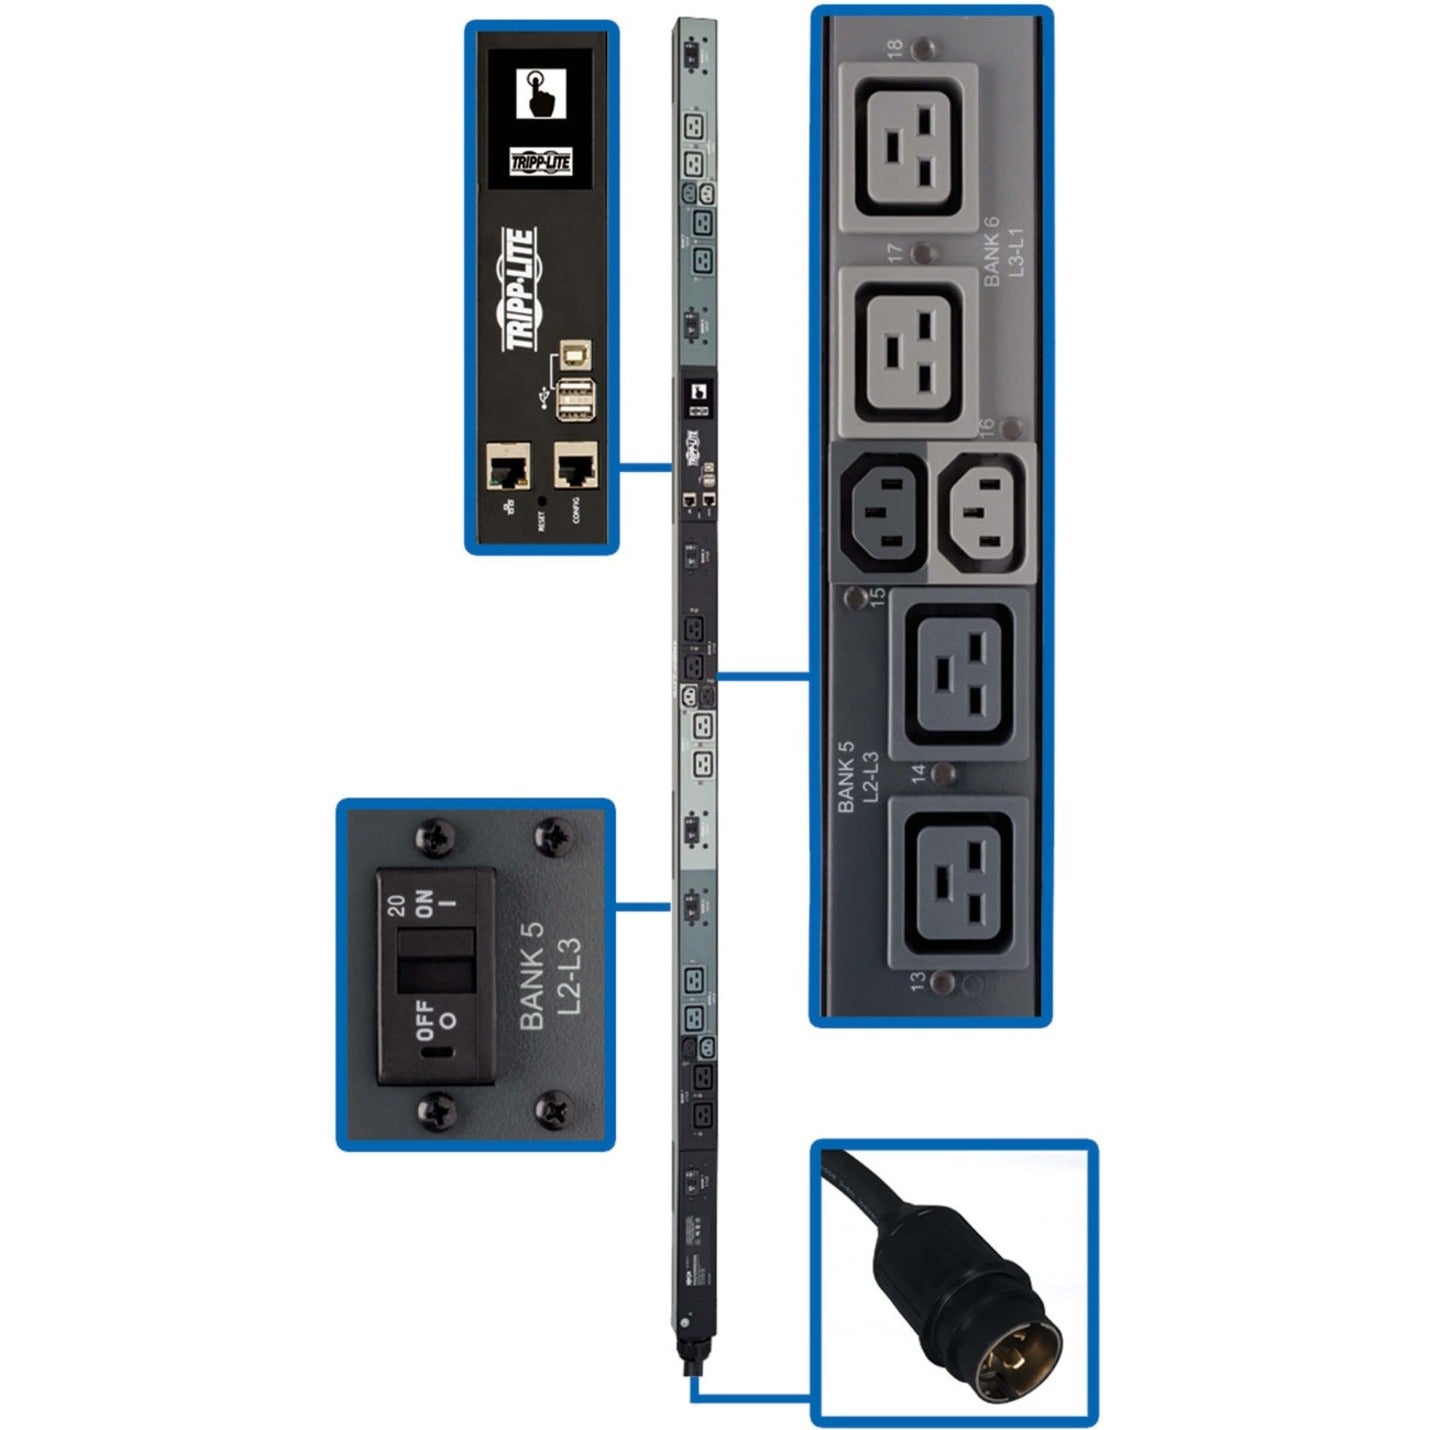 Tripp Lite PDU3EVNR6H50A 18-Outlets PDU, 14.40 kW Power Rating, Monitored, Three Phase, Rack-mountable